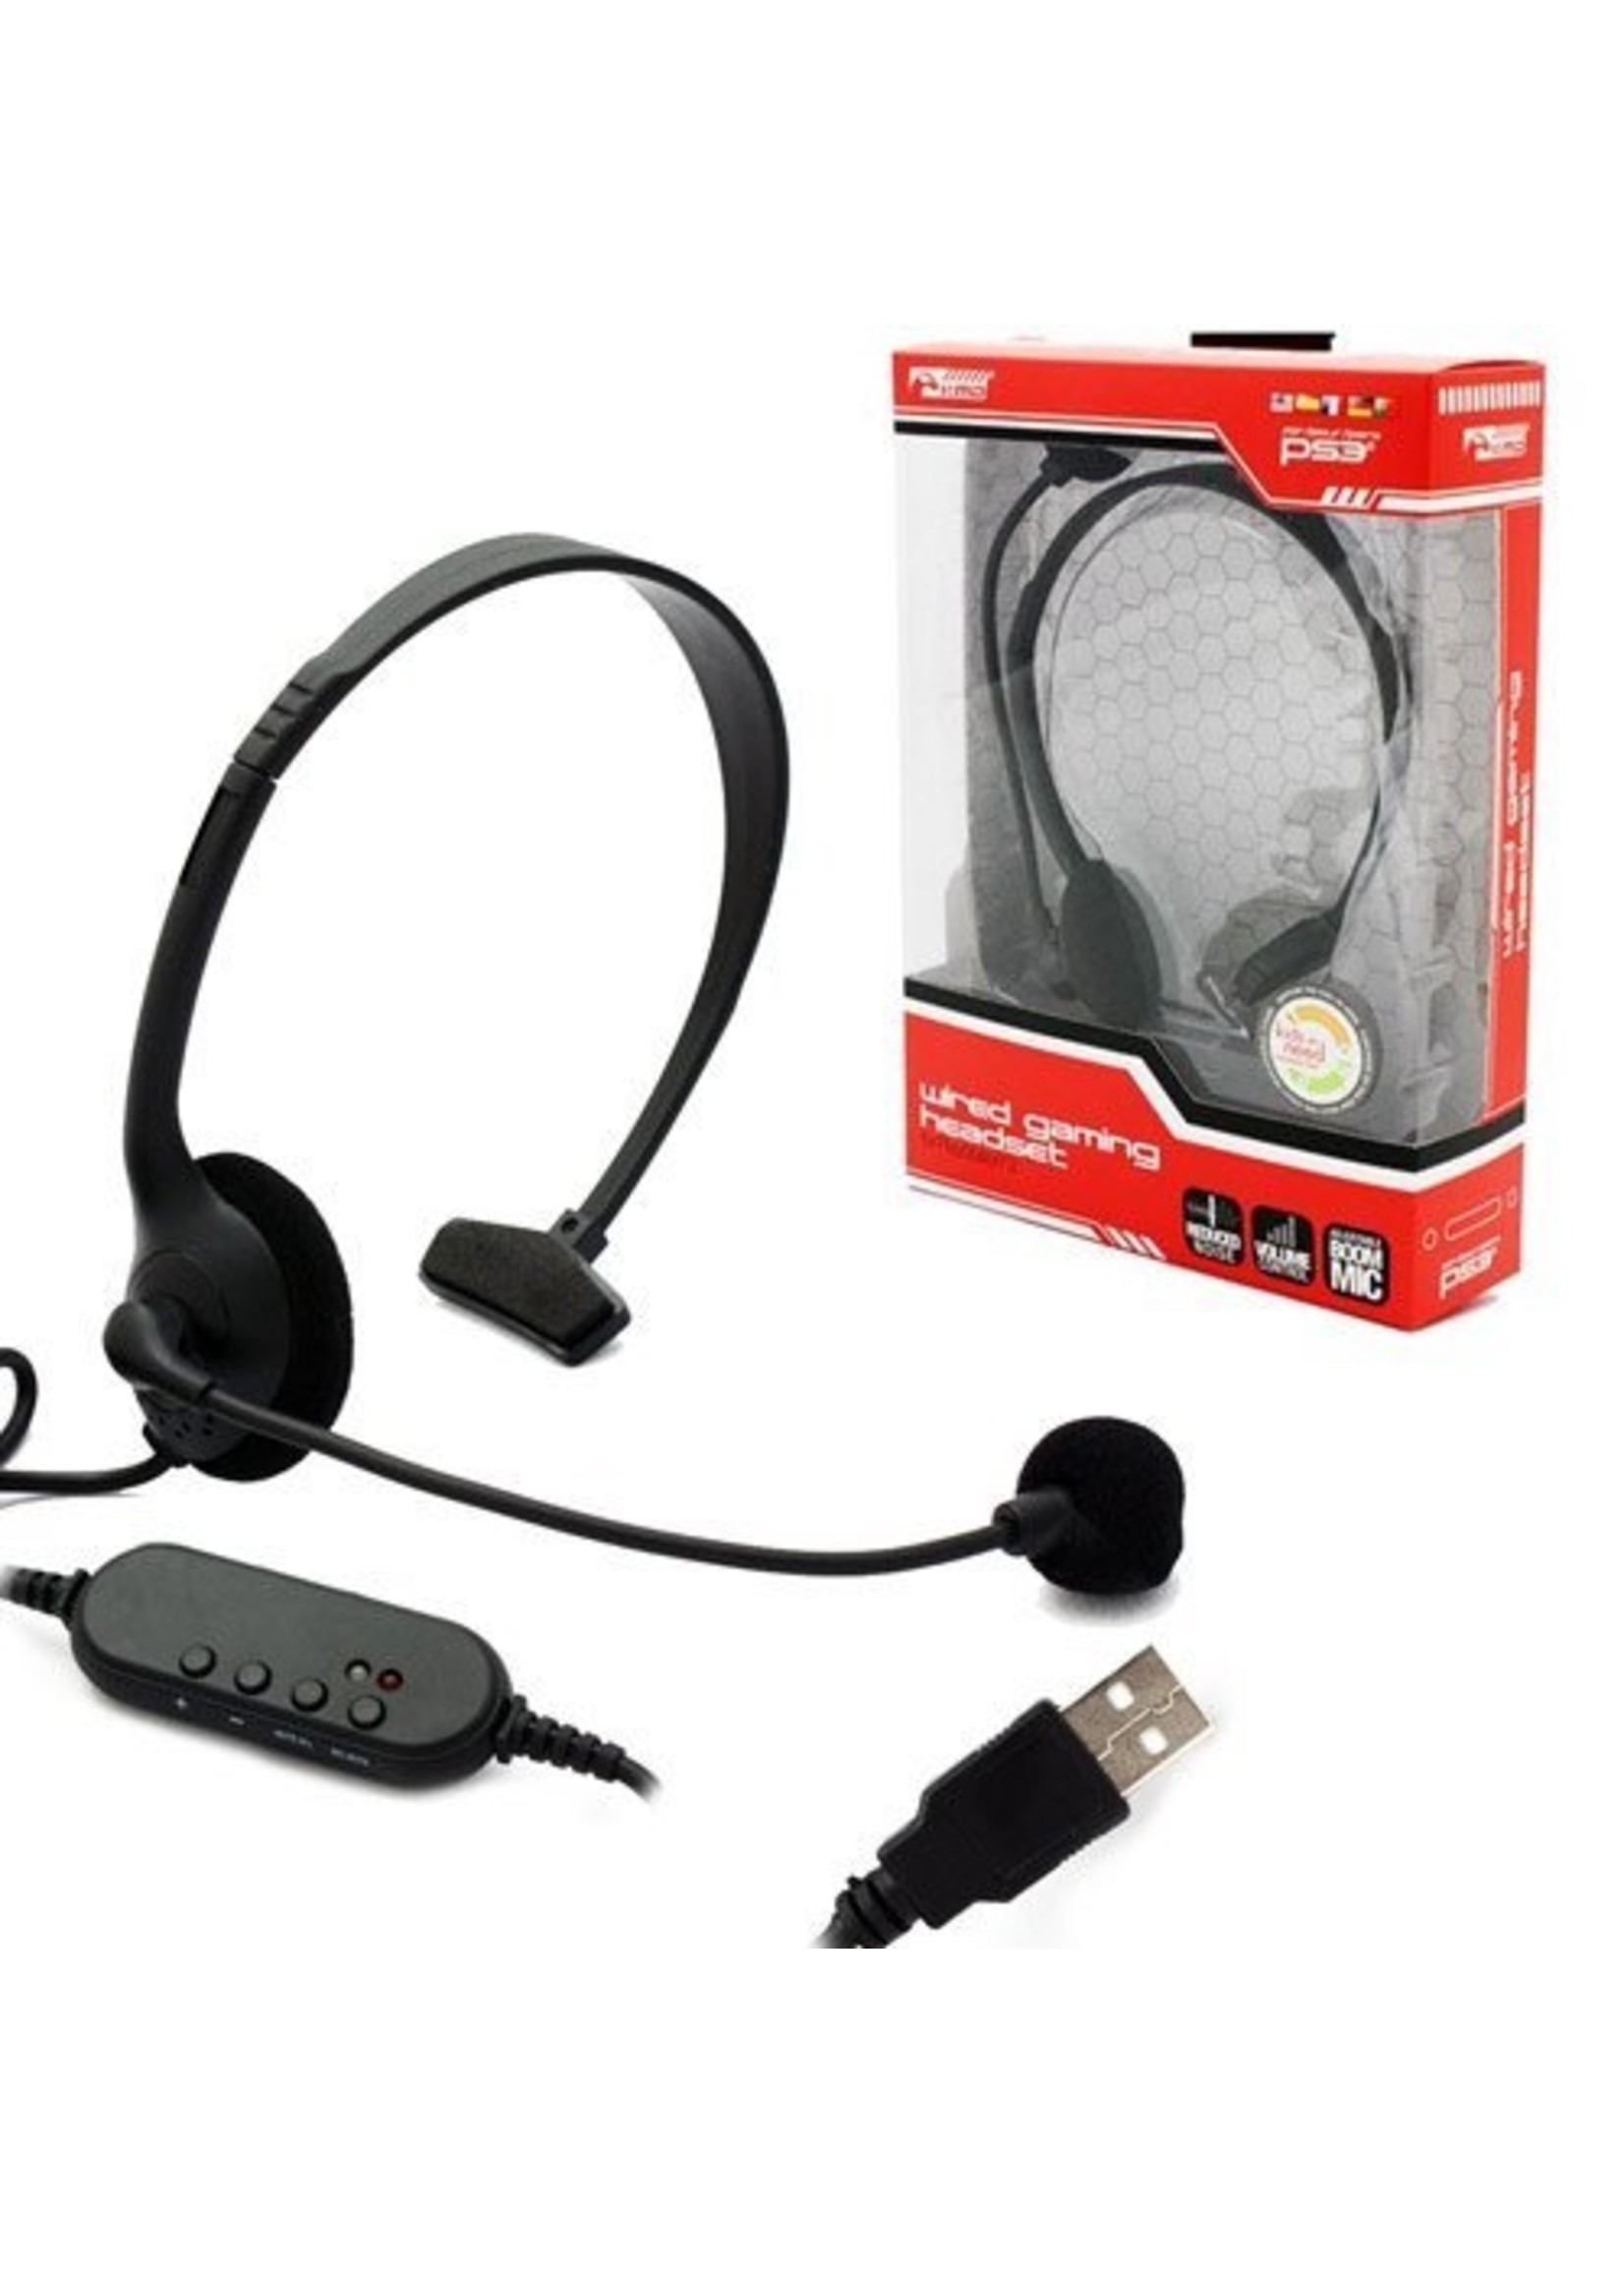 PS3 Headset Wired KMD